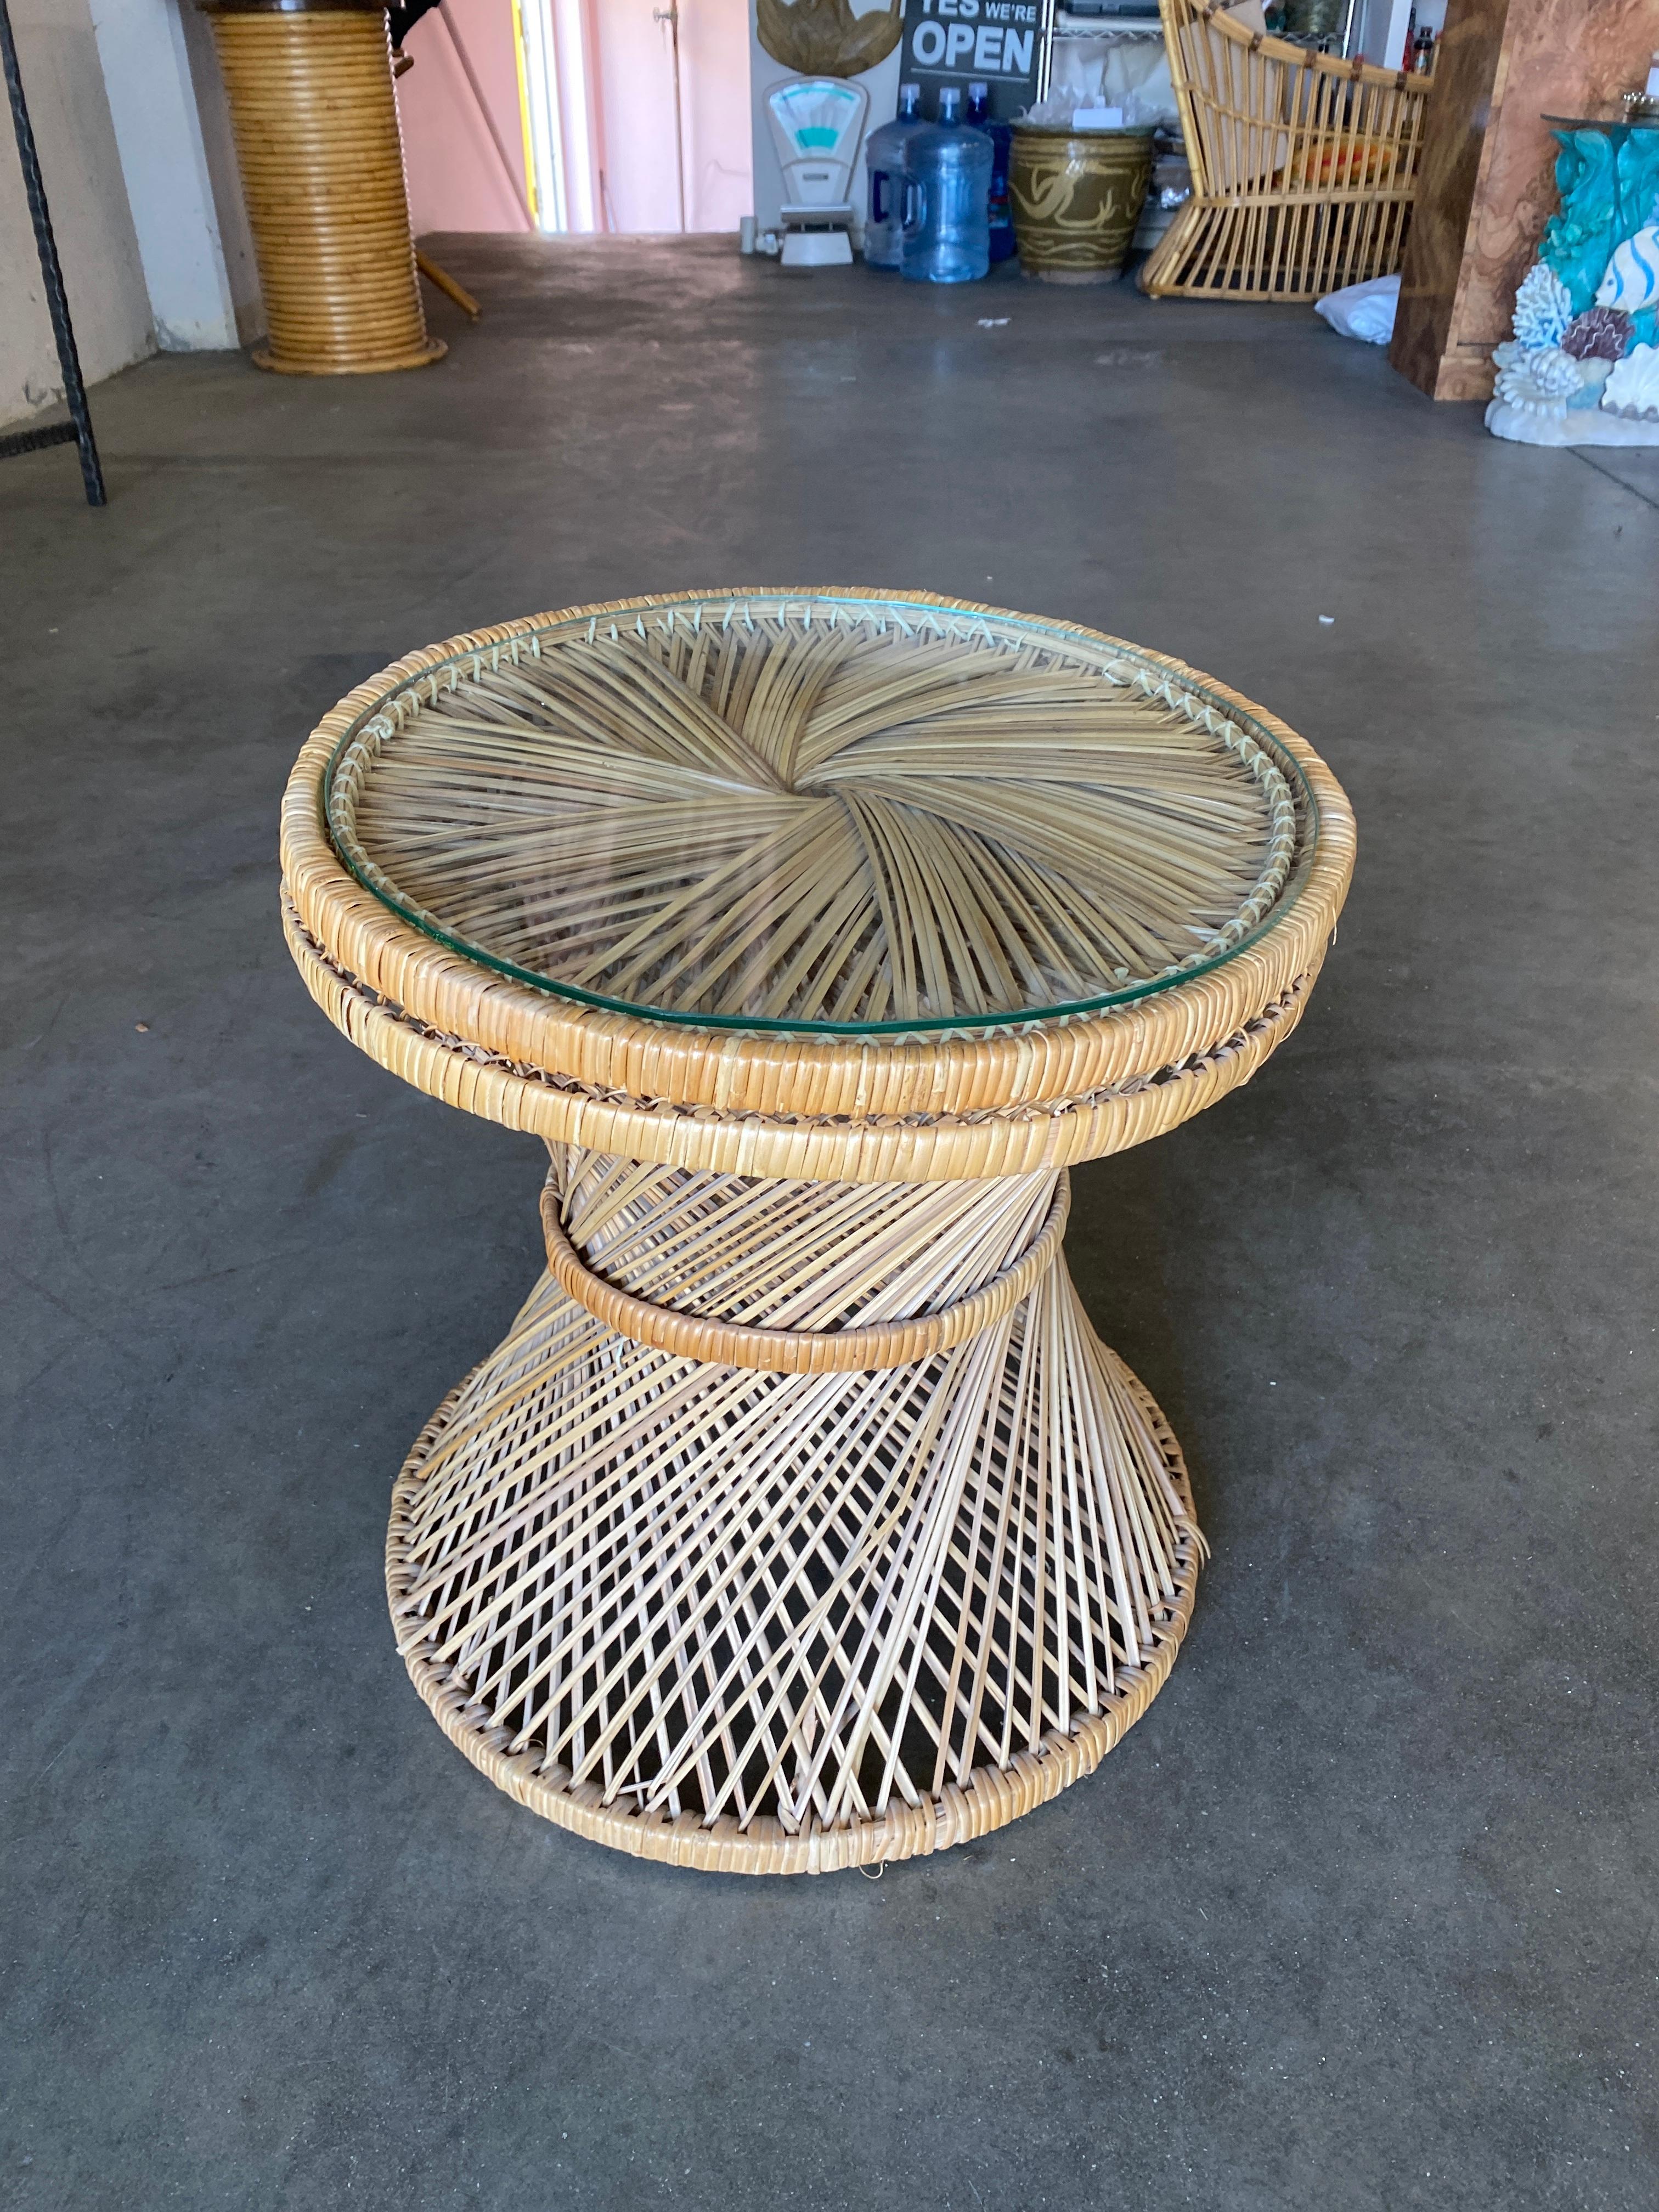 Round Woven wicker side table w/ glass top.

Circa 1970.